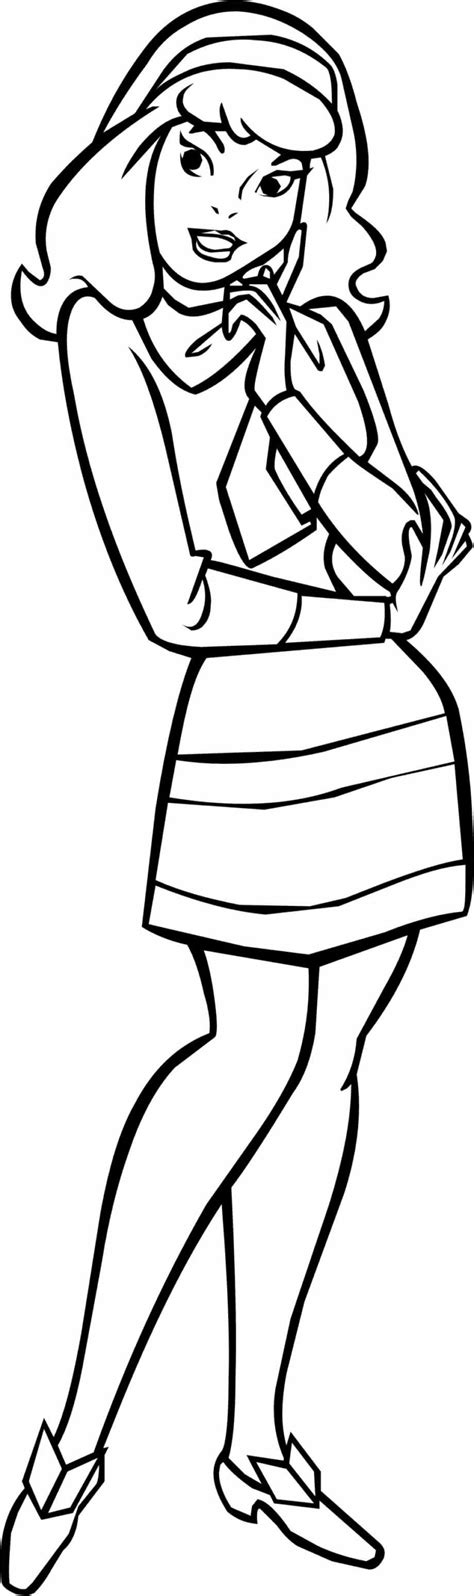 Daphne Blake Coloring Page Download Print Or Color Online For Free